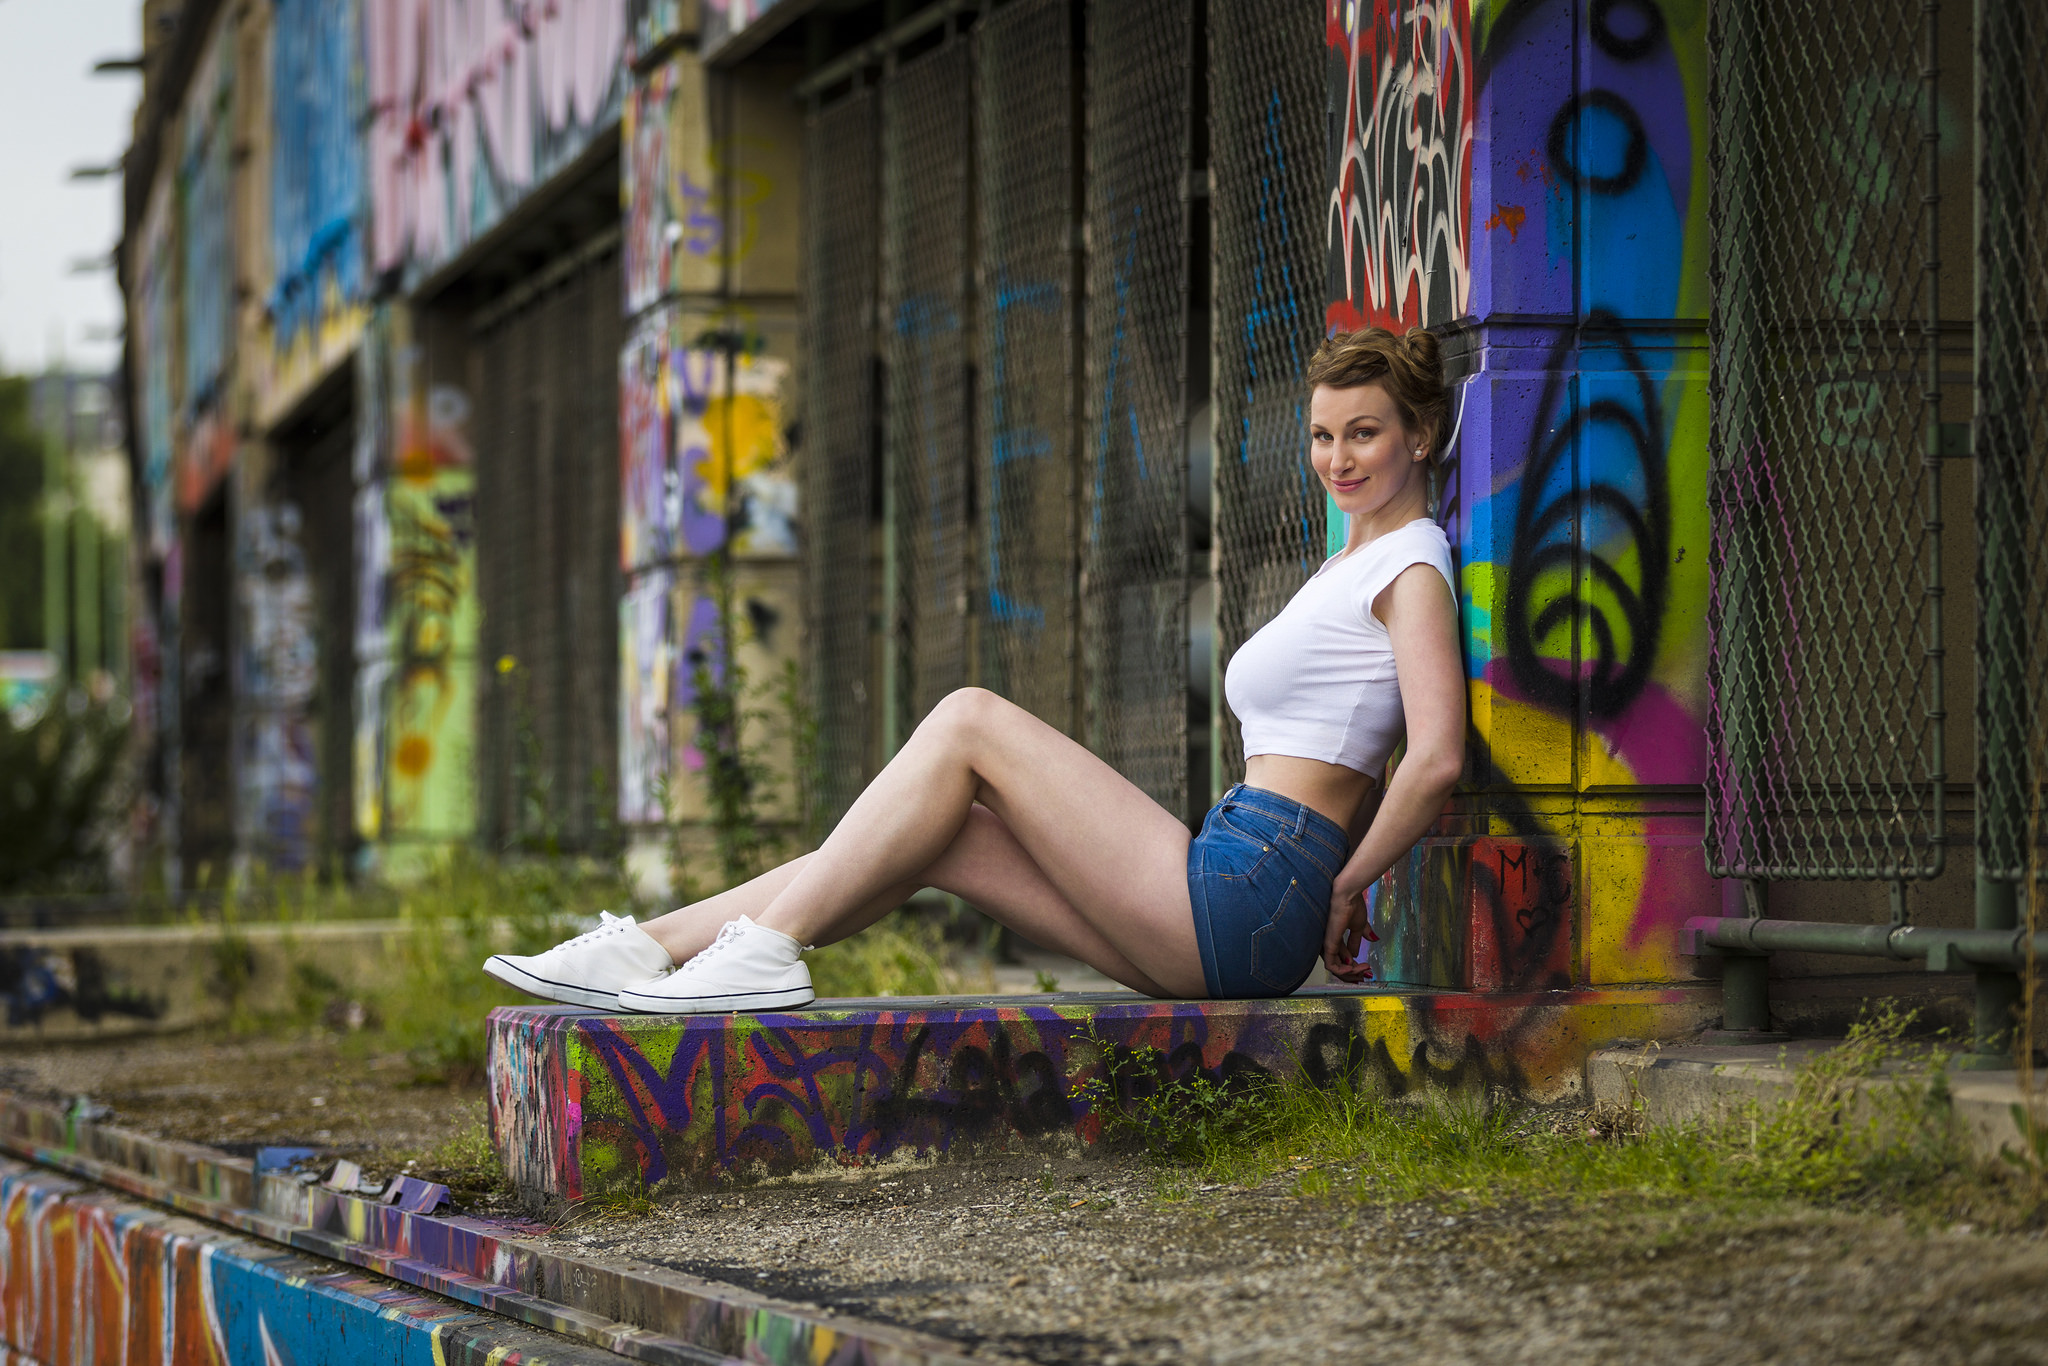 People 2048x1366 women model women outdoors looking at viewer crop top jean shorts sitting Converse graffiti painted nails